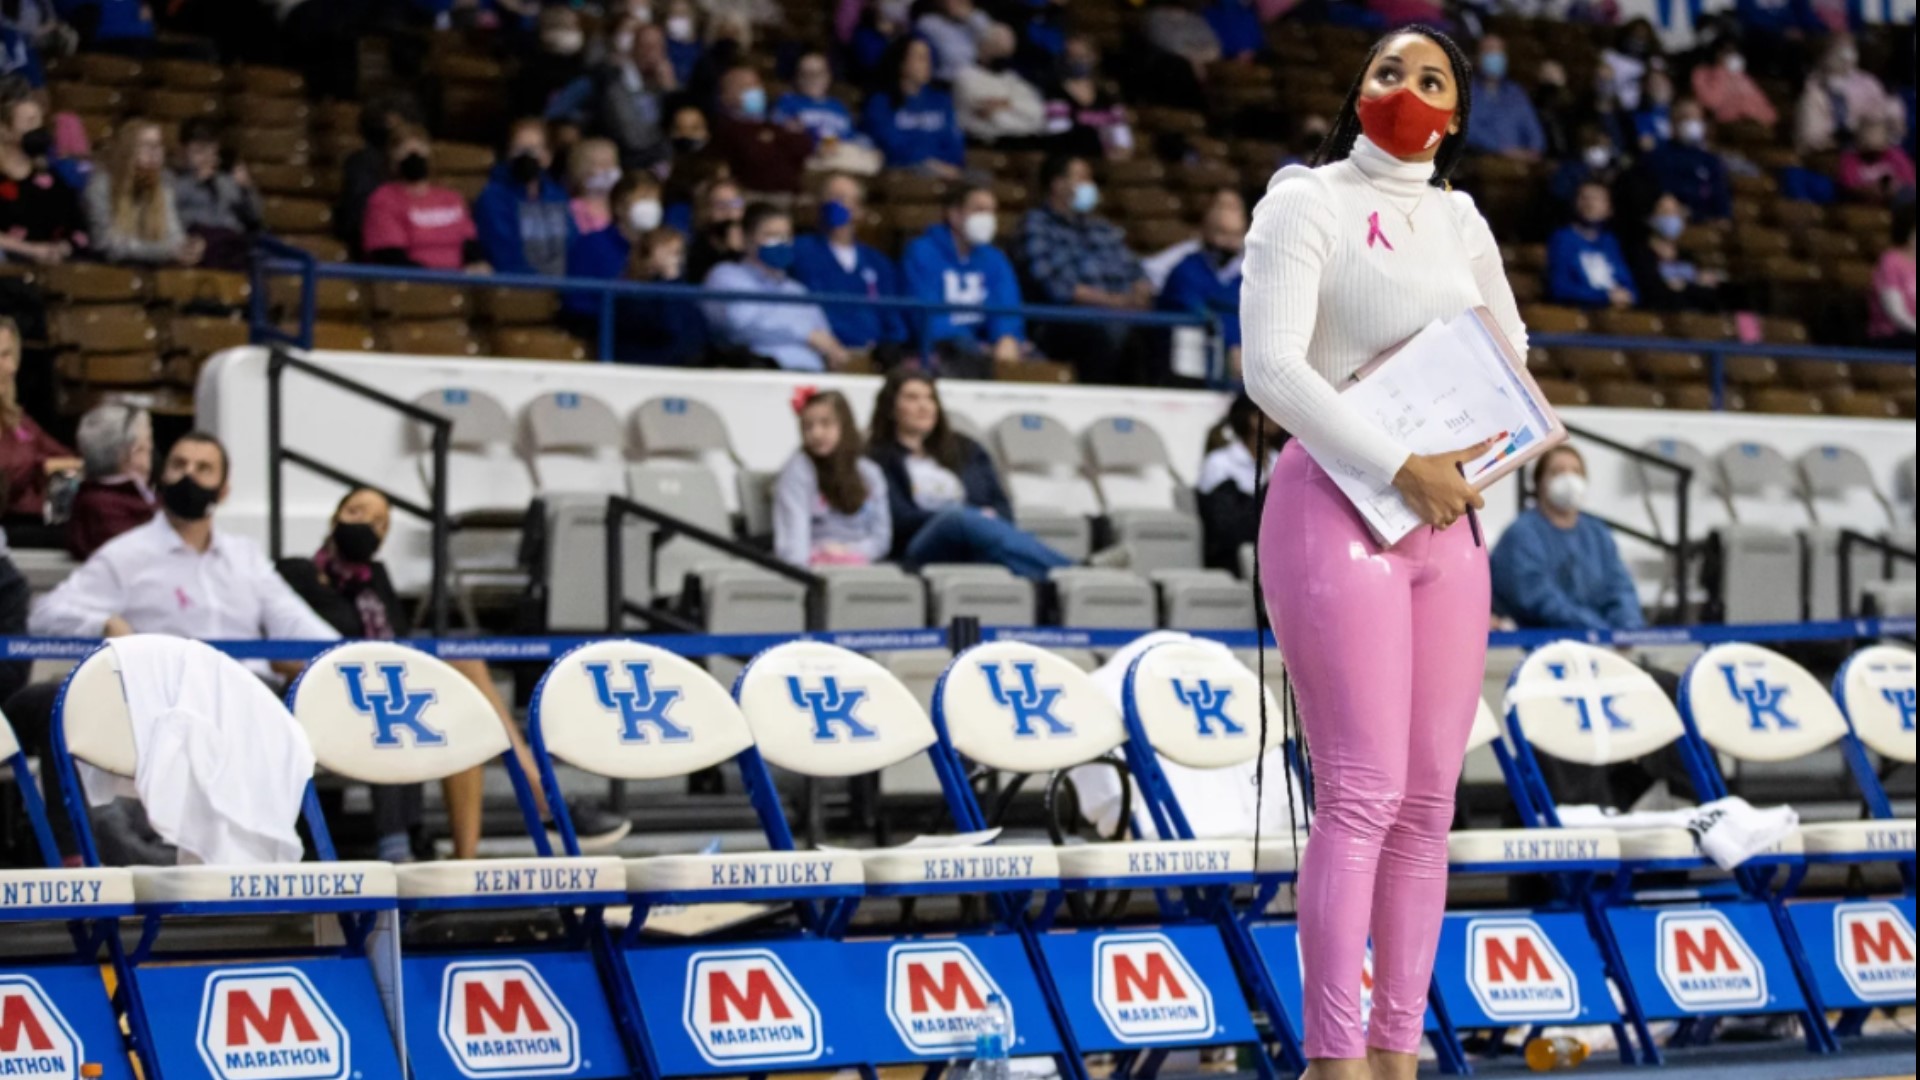 Coach Carter's courtside attire sparked controversy online with some stating her pink pants worn during a game were unprofessional.